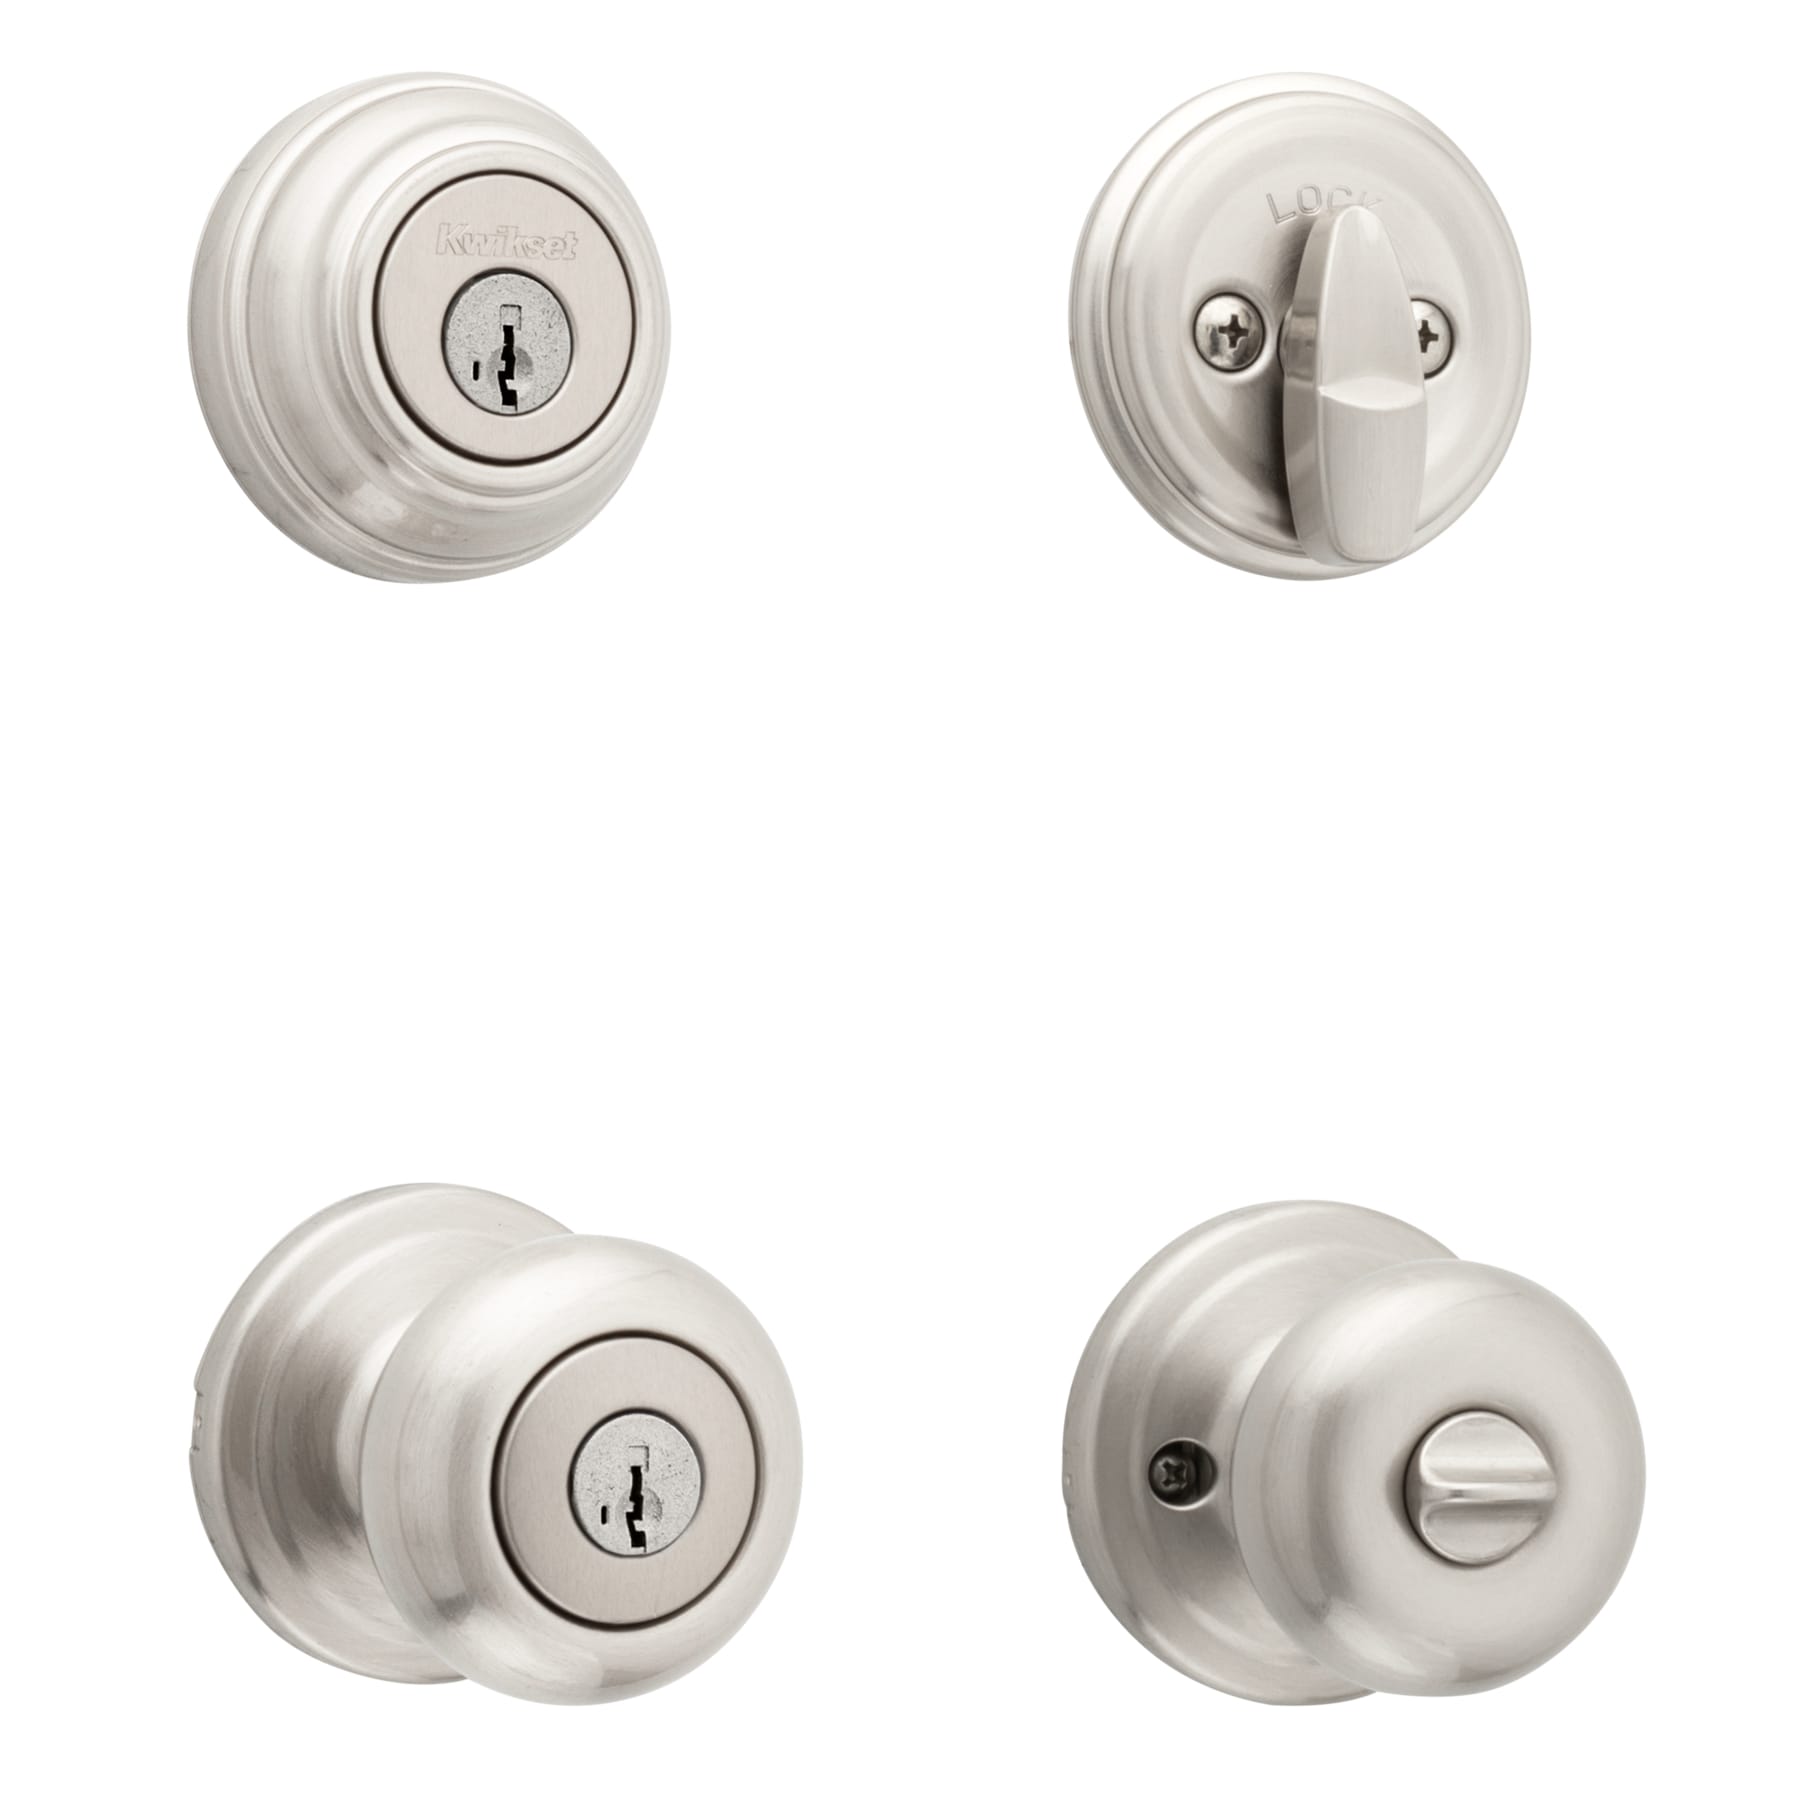 Kwikset Signature Series Signatures Juno Satin Nickel Smartkey Exterior  Single-cylinder deadbolt Keyed Entry Door Knob Combo Pack with  Antimicrobial Technology in the Door Knobs department at